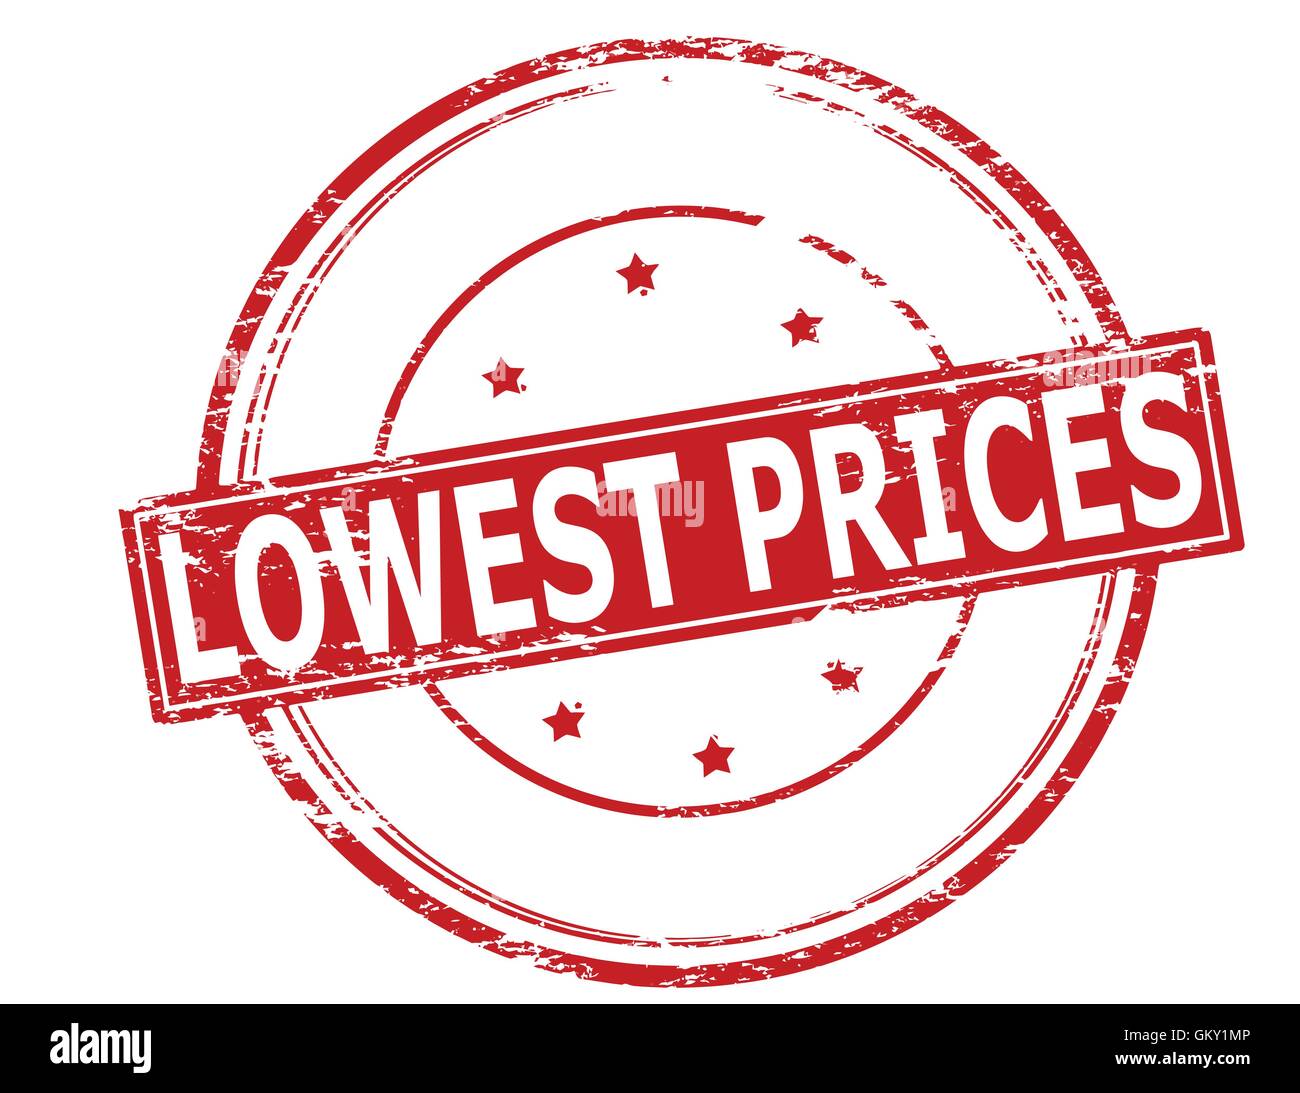 Lowest prices Stock Vector